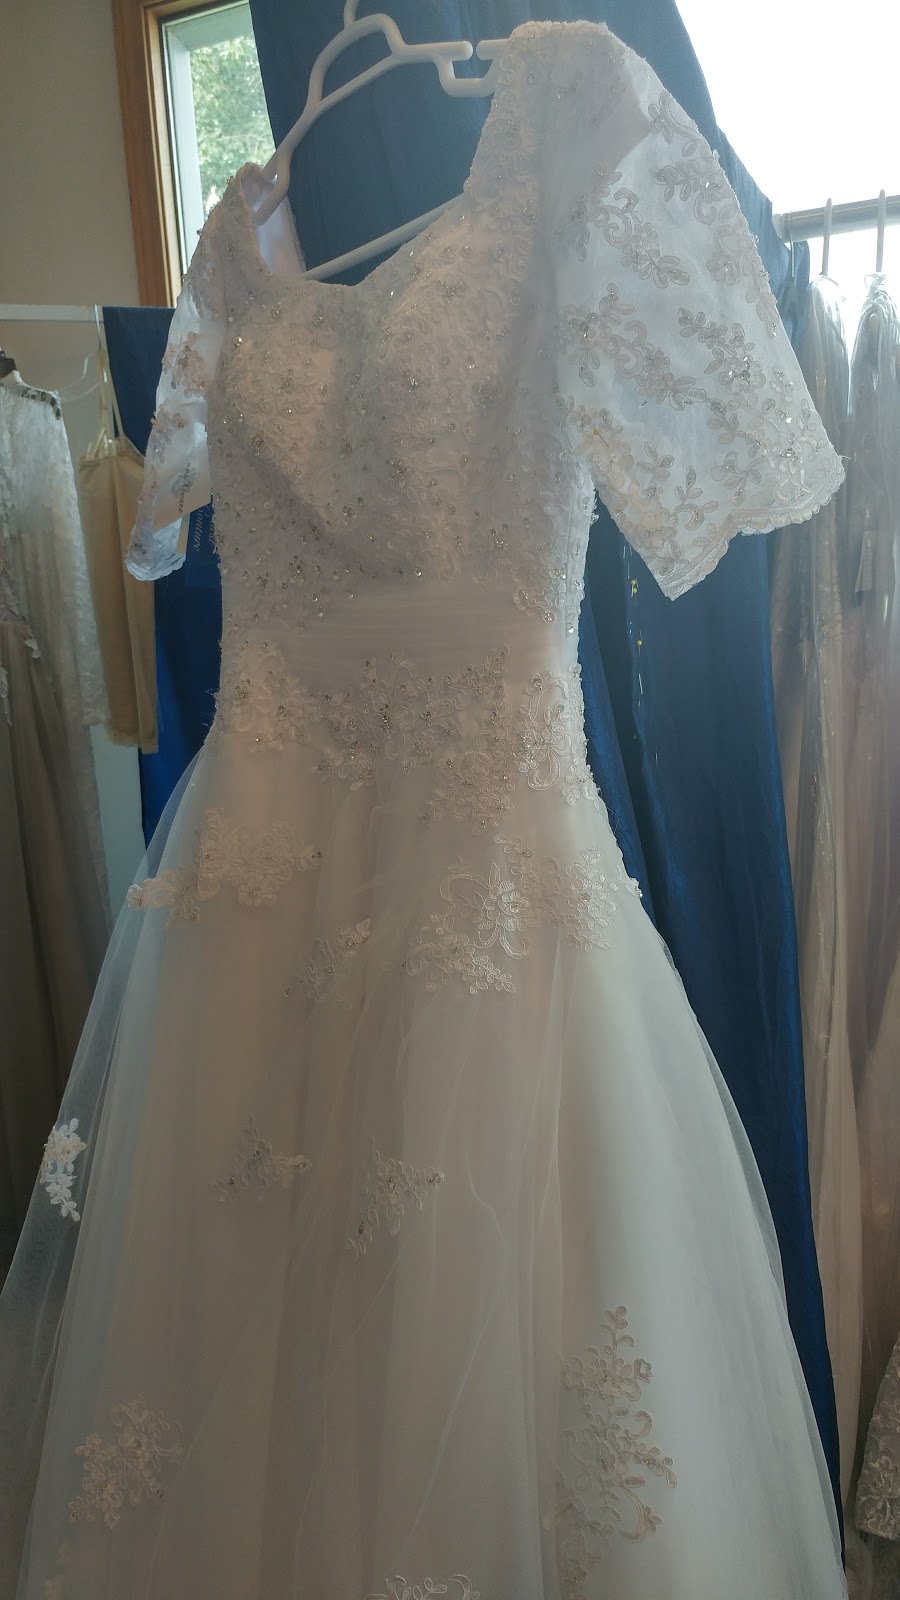 Modest Couture Bridal | 5720 W Overland Rd, Meridian, ID 83642, USA | Phone: (208) 863-0332